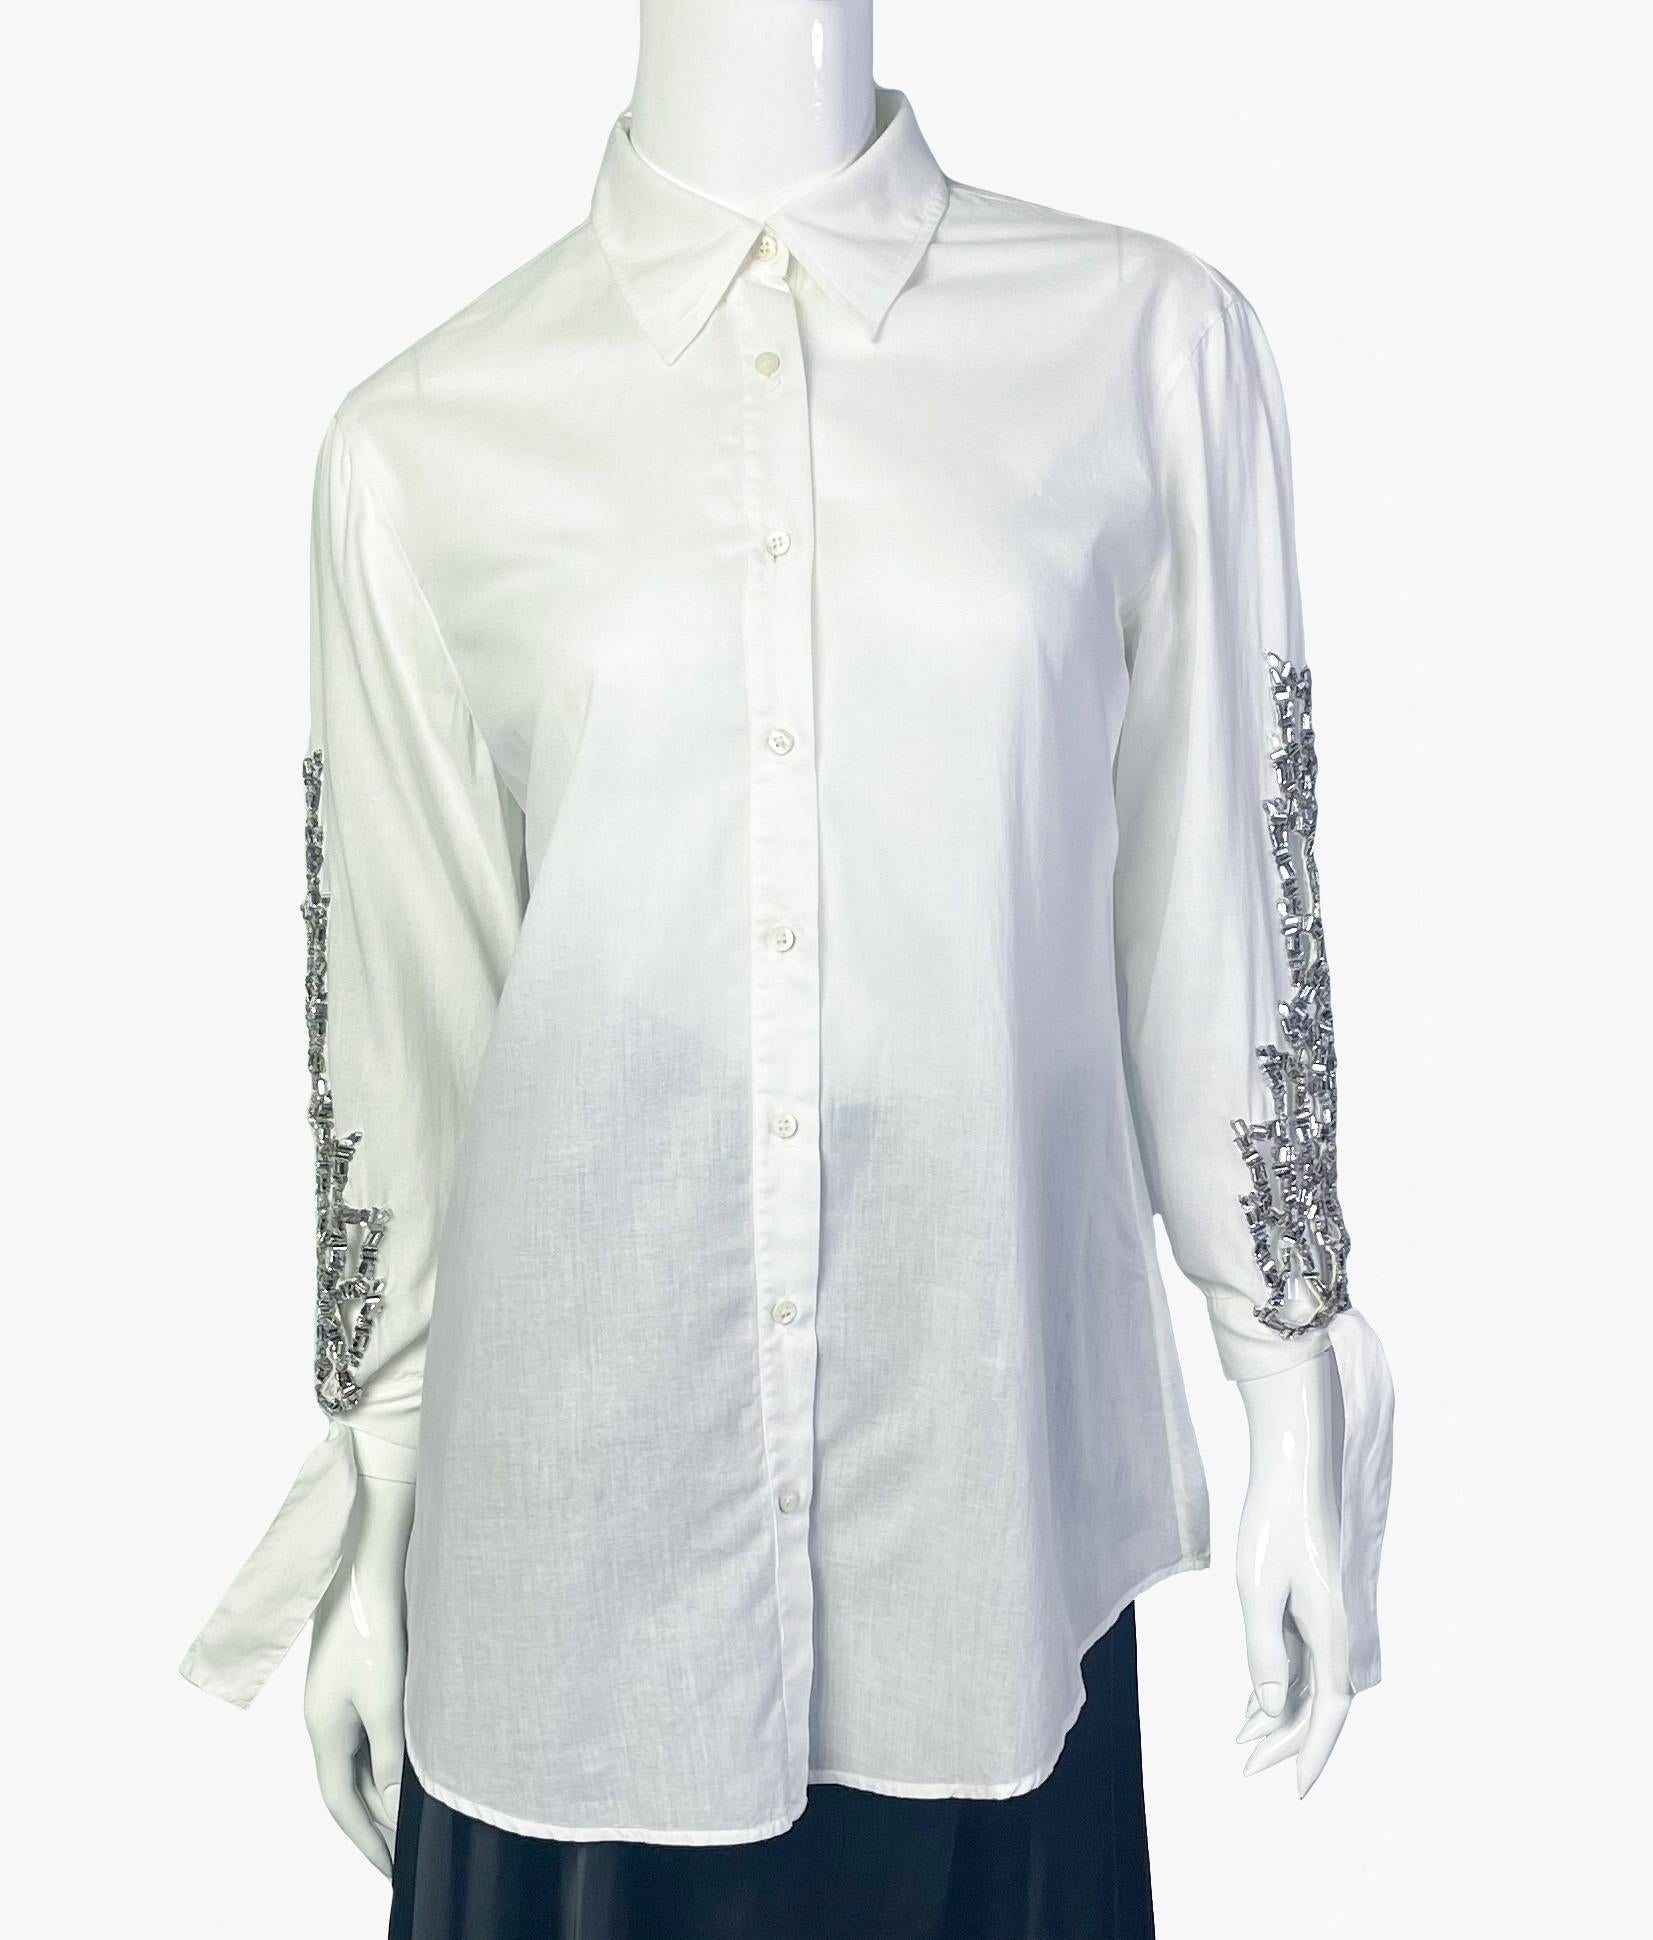 Roberto Cavalli button-up top with rhinestone appliqué on sleeves. 

Period – 2004

Size – XS-S

Length – 67,5 cm

Sleeve -50 cm

From armpit to armpit – 48 cm

Waist – 84 cm

Fabric – 100% cotton

Condition – very good

........Additional